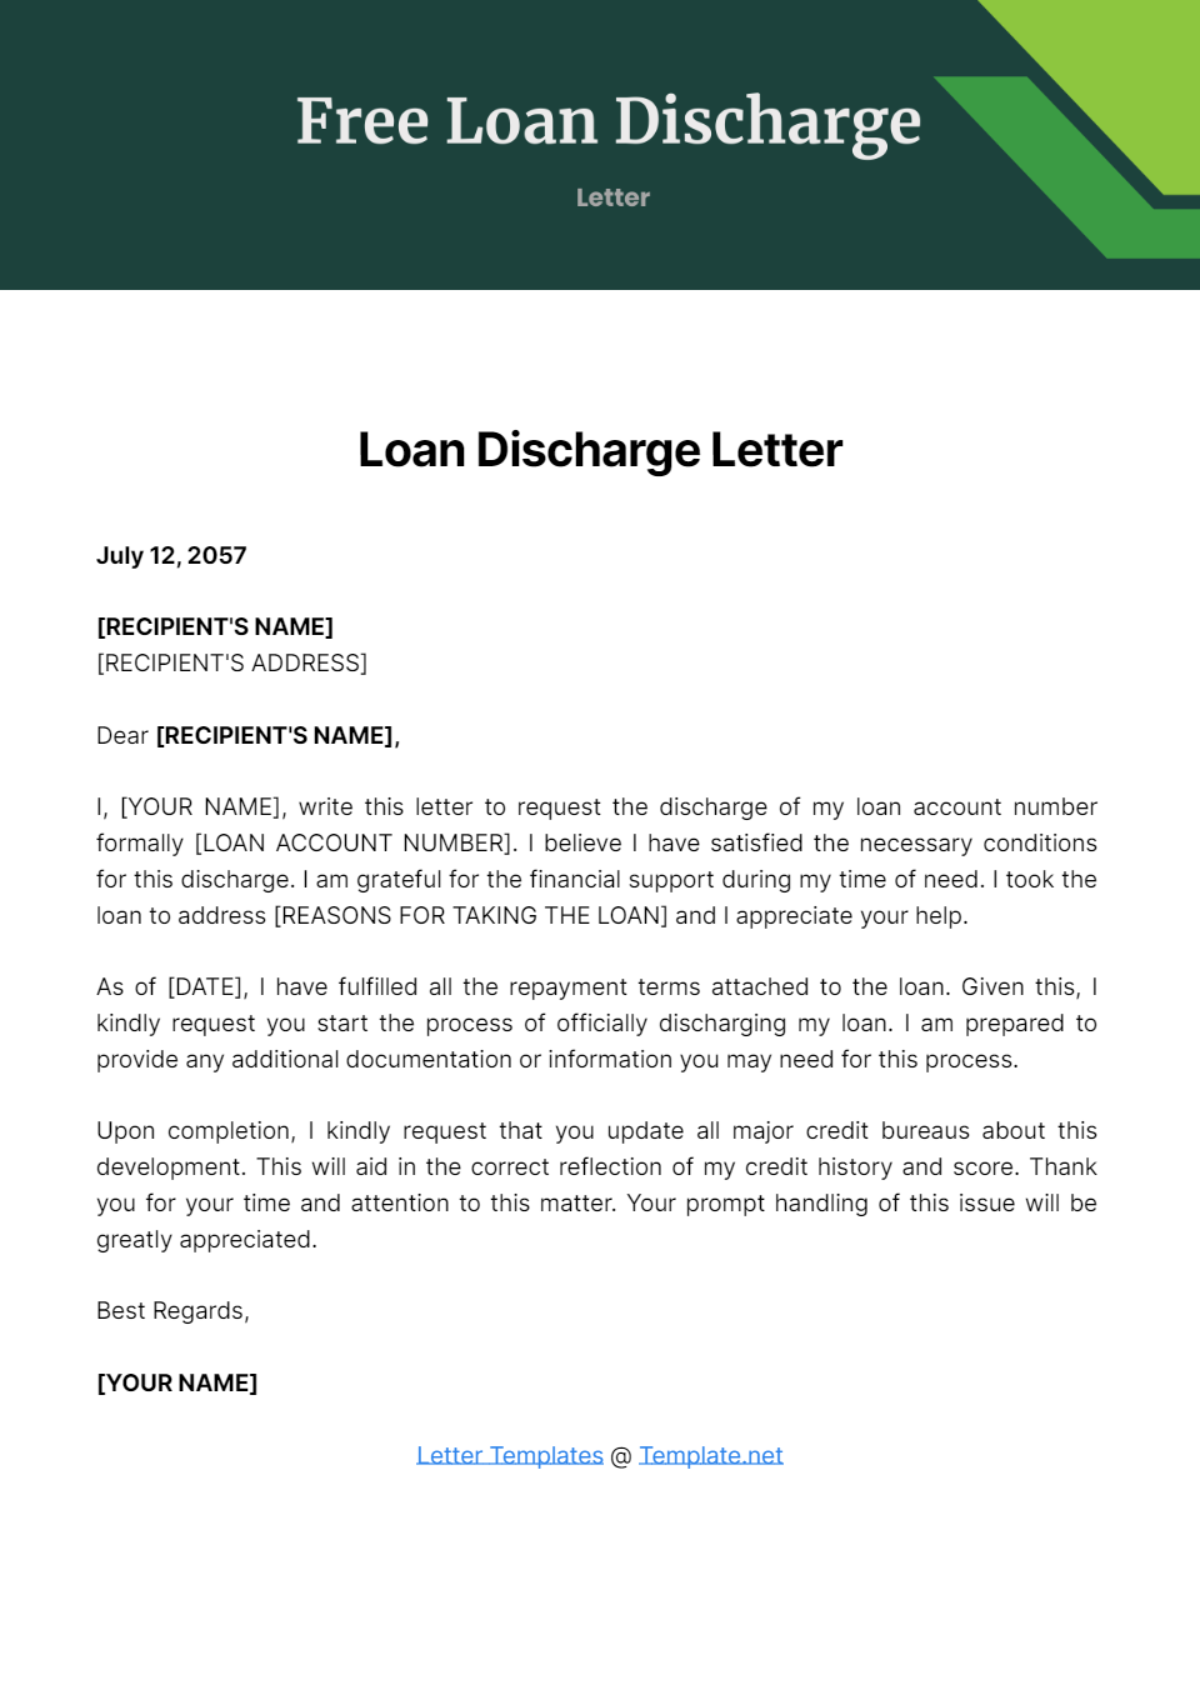 Free Loan Discharge Letter Template